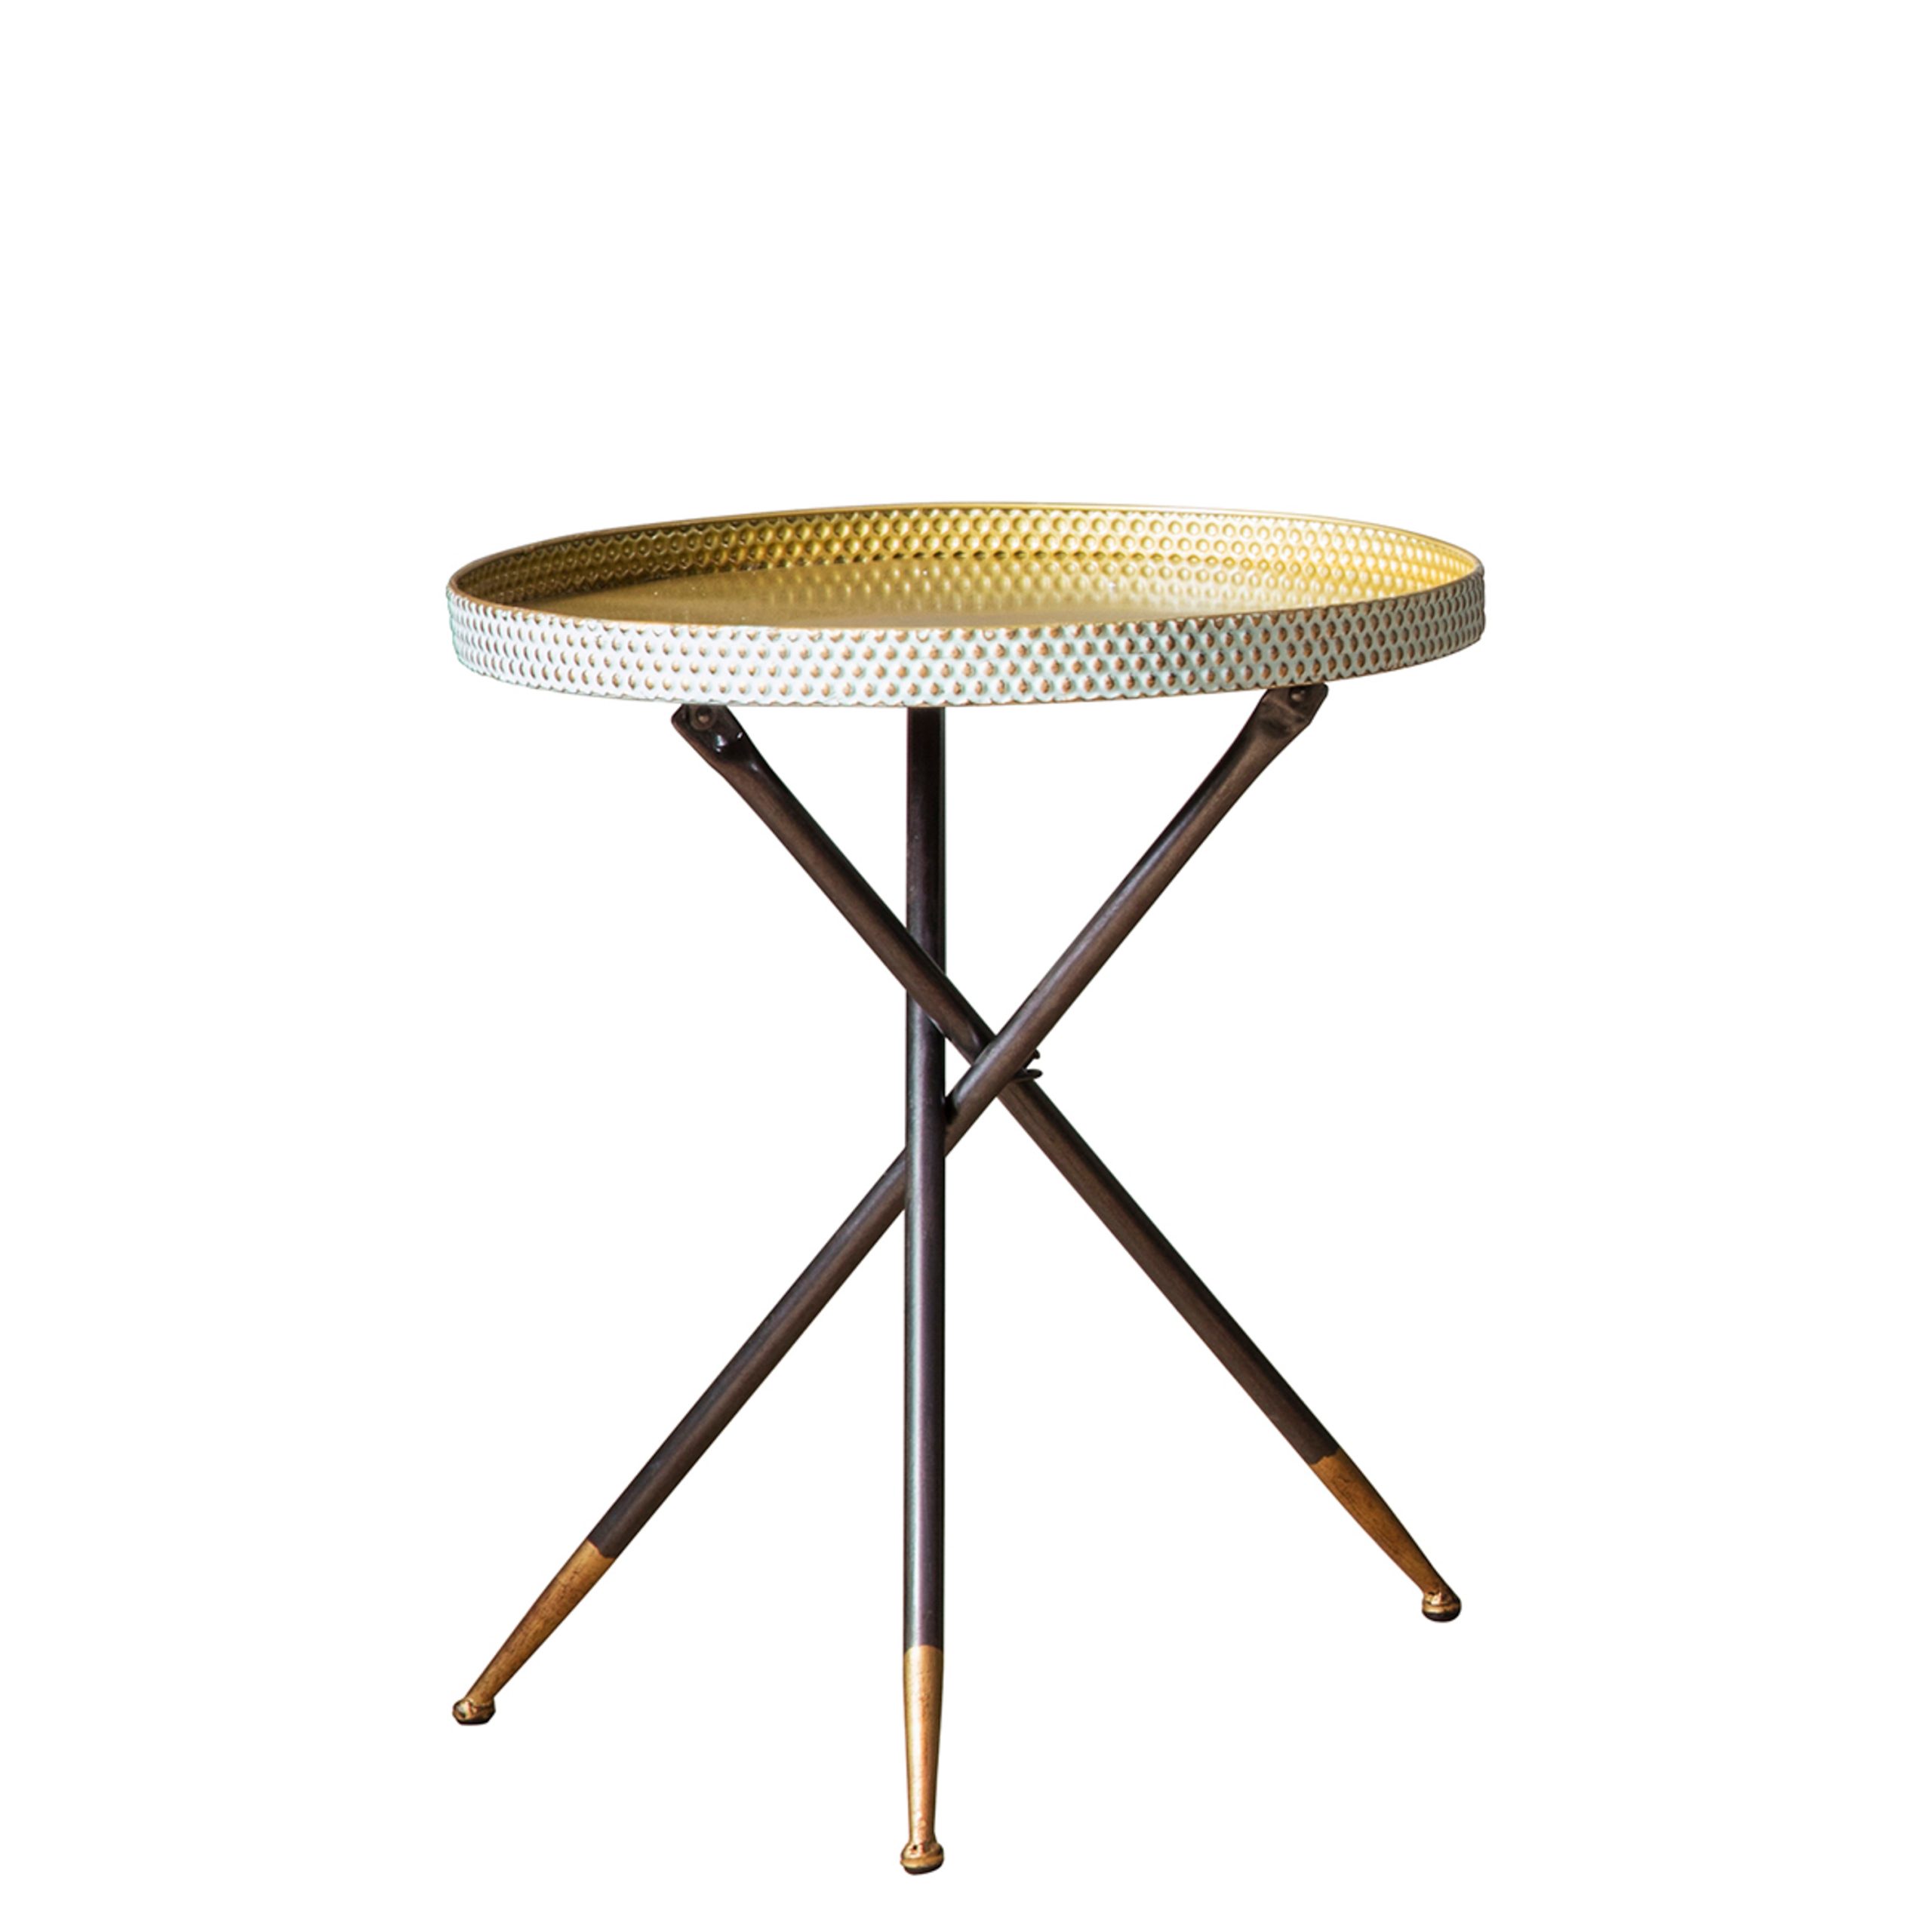 Gallery Direct Epsom Tripod Table